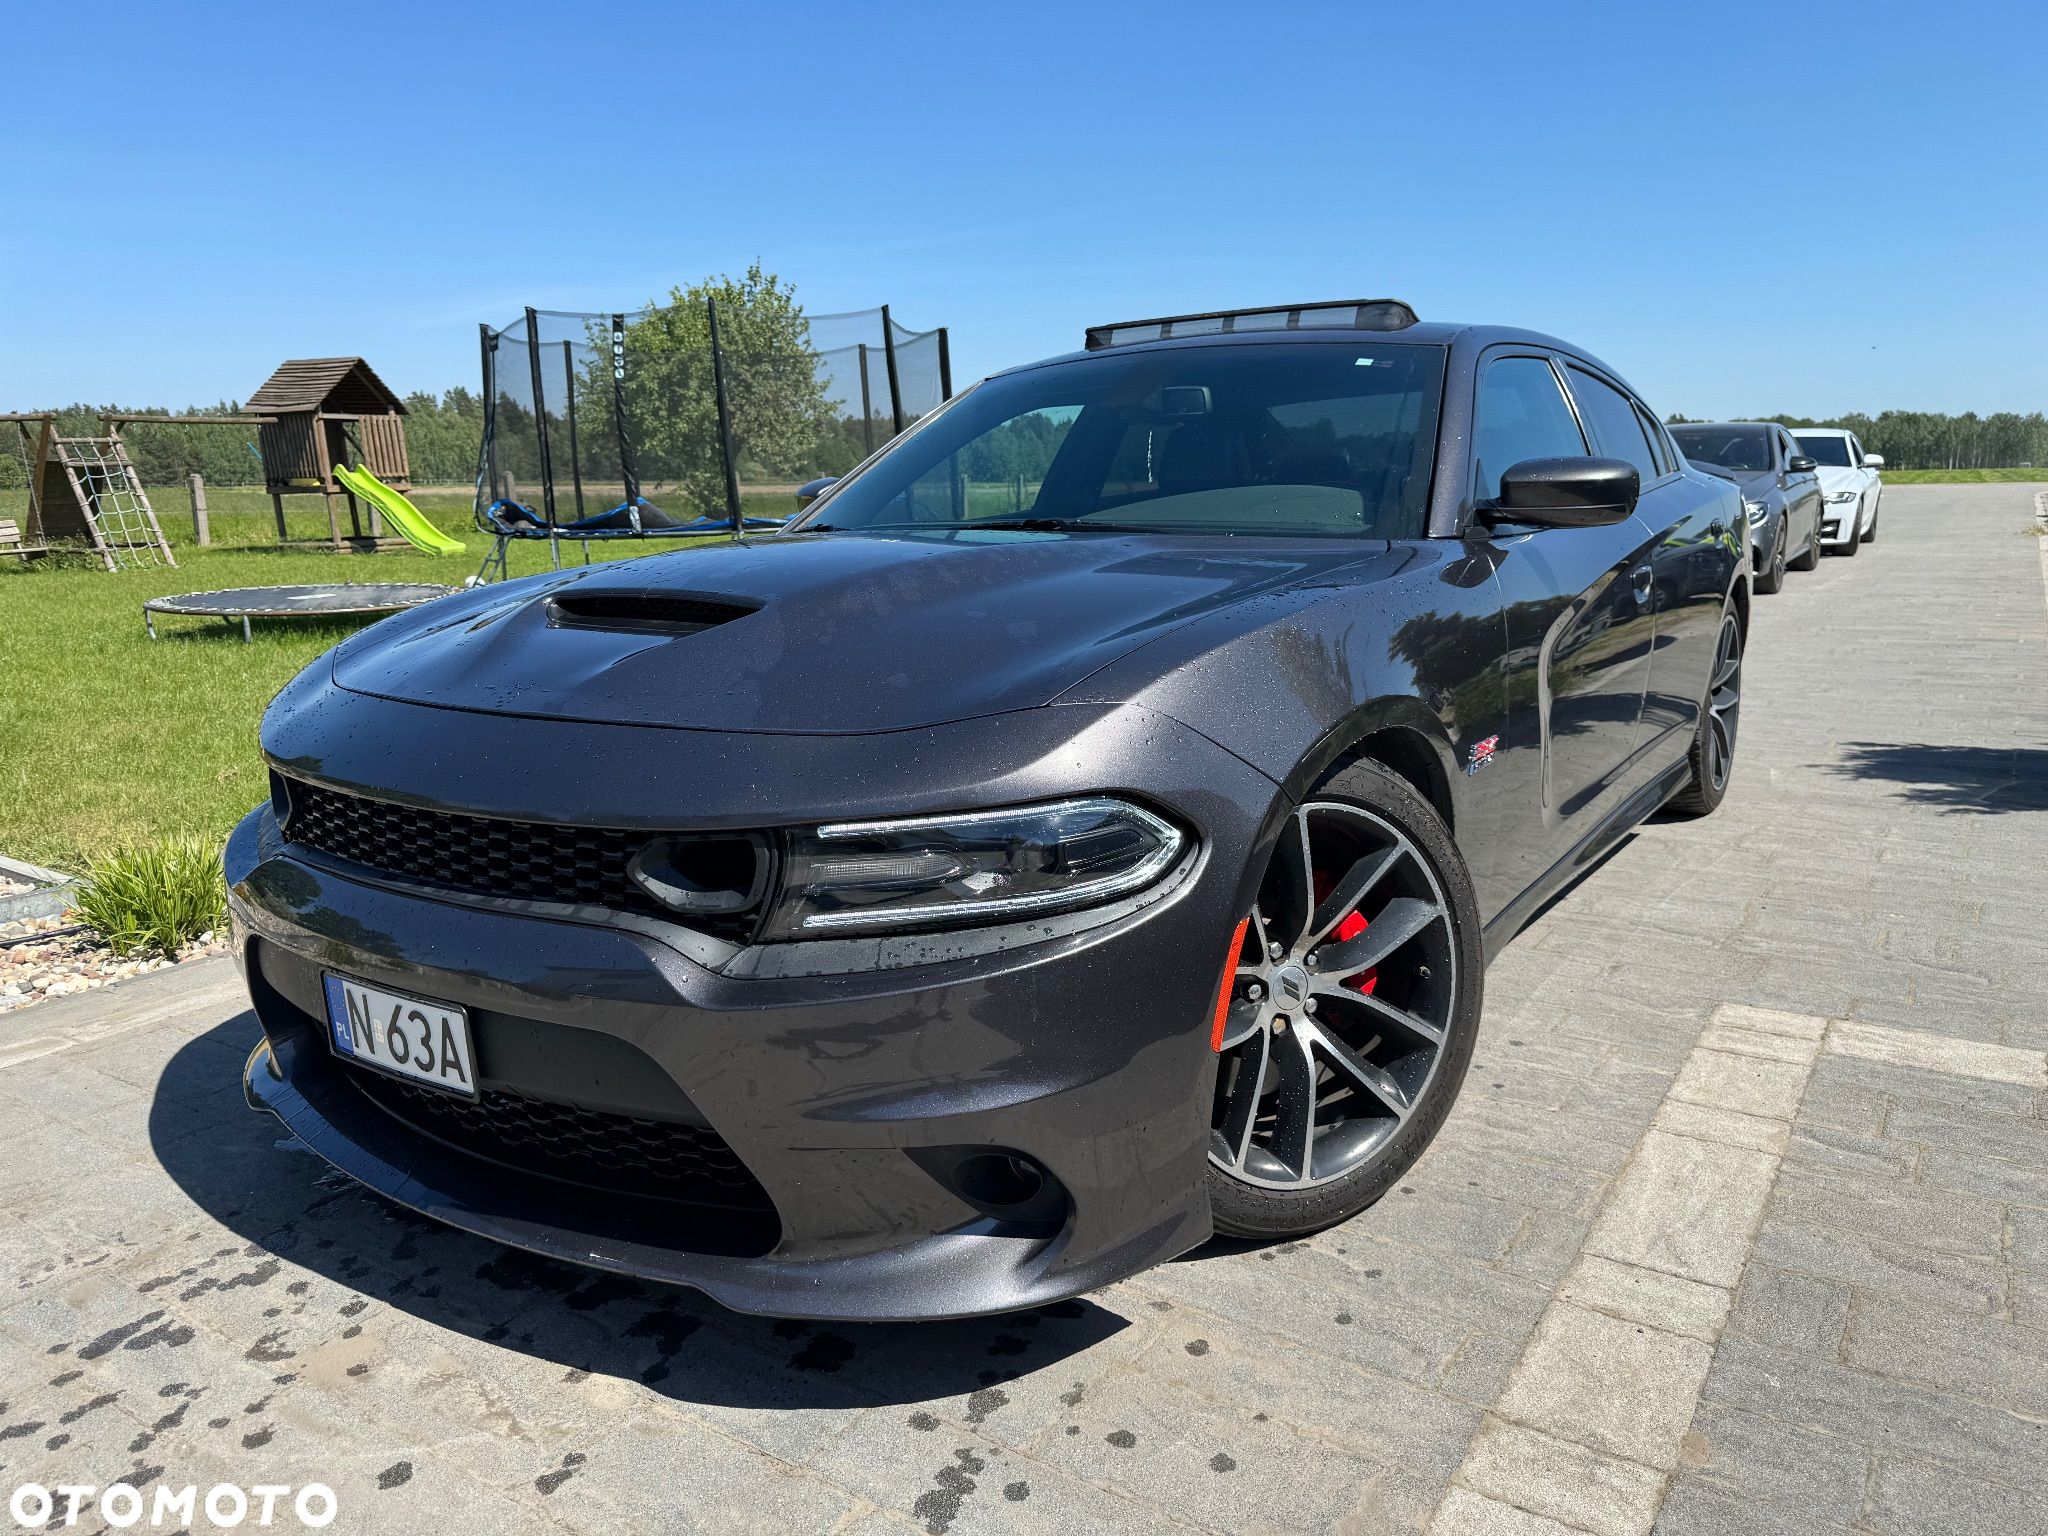 Dodge Charger - 1